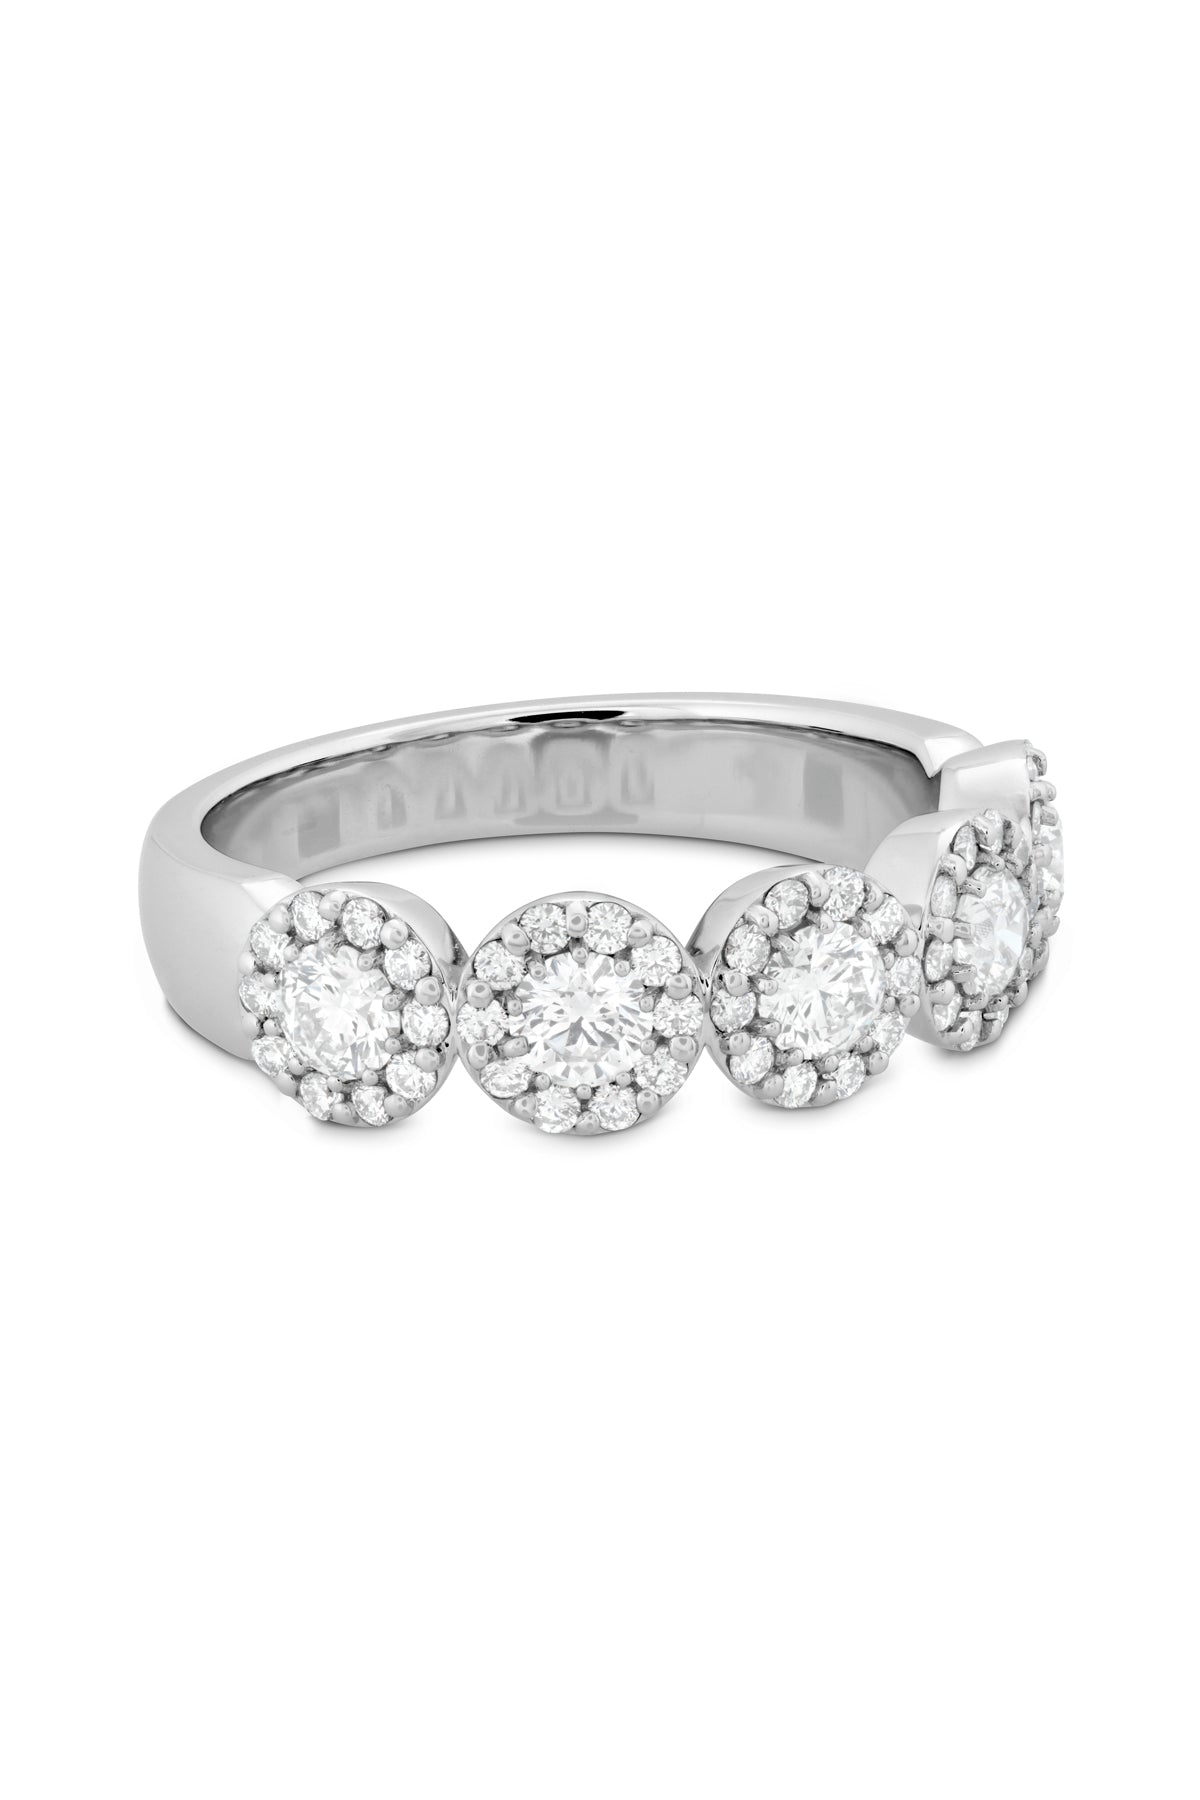 Fulfillment Round Band From Hearts On Fire available at LeGassick Diamonds and Jewellery Gold Coast, Australia.